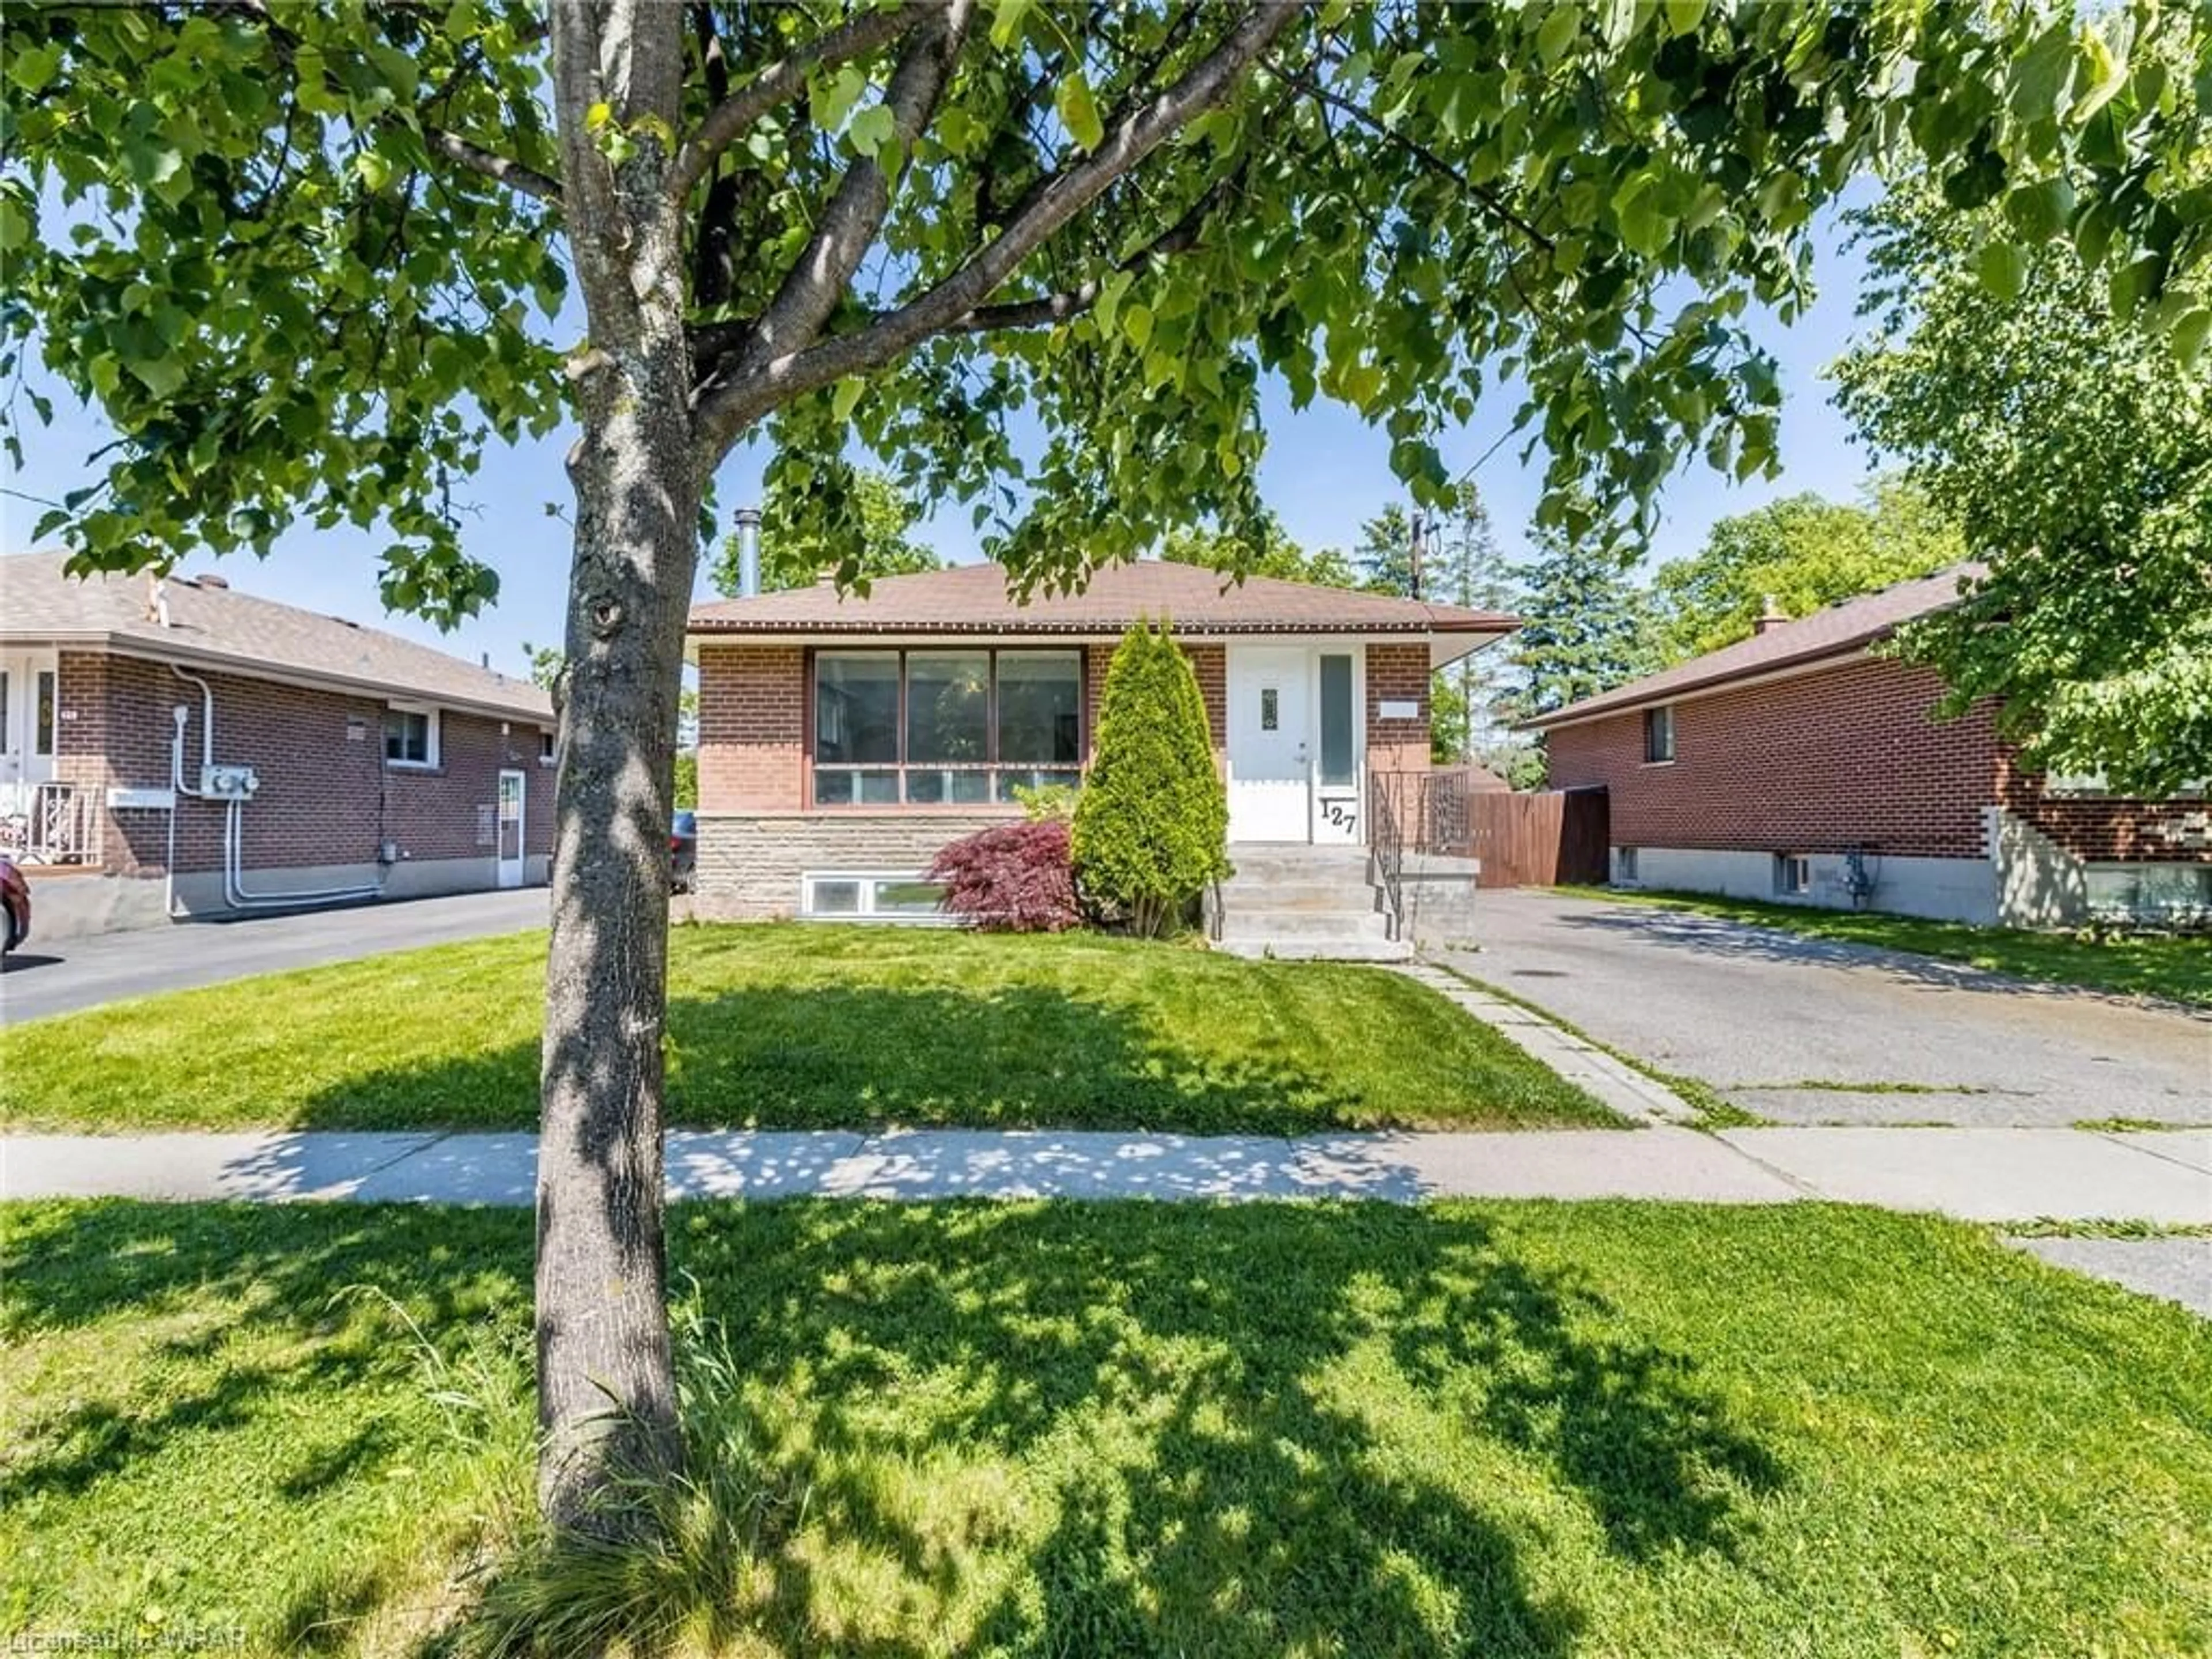 Frontside or backside of a home for 127 Cabot St, Oshawa Ontario L1J 5R8